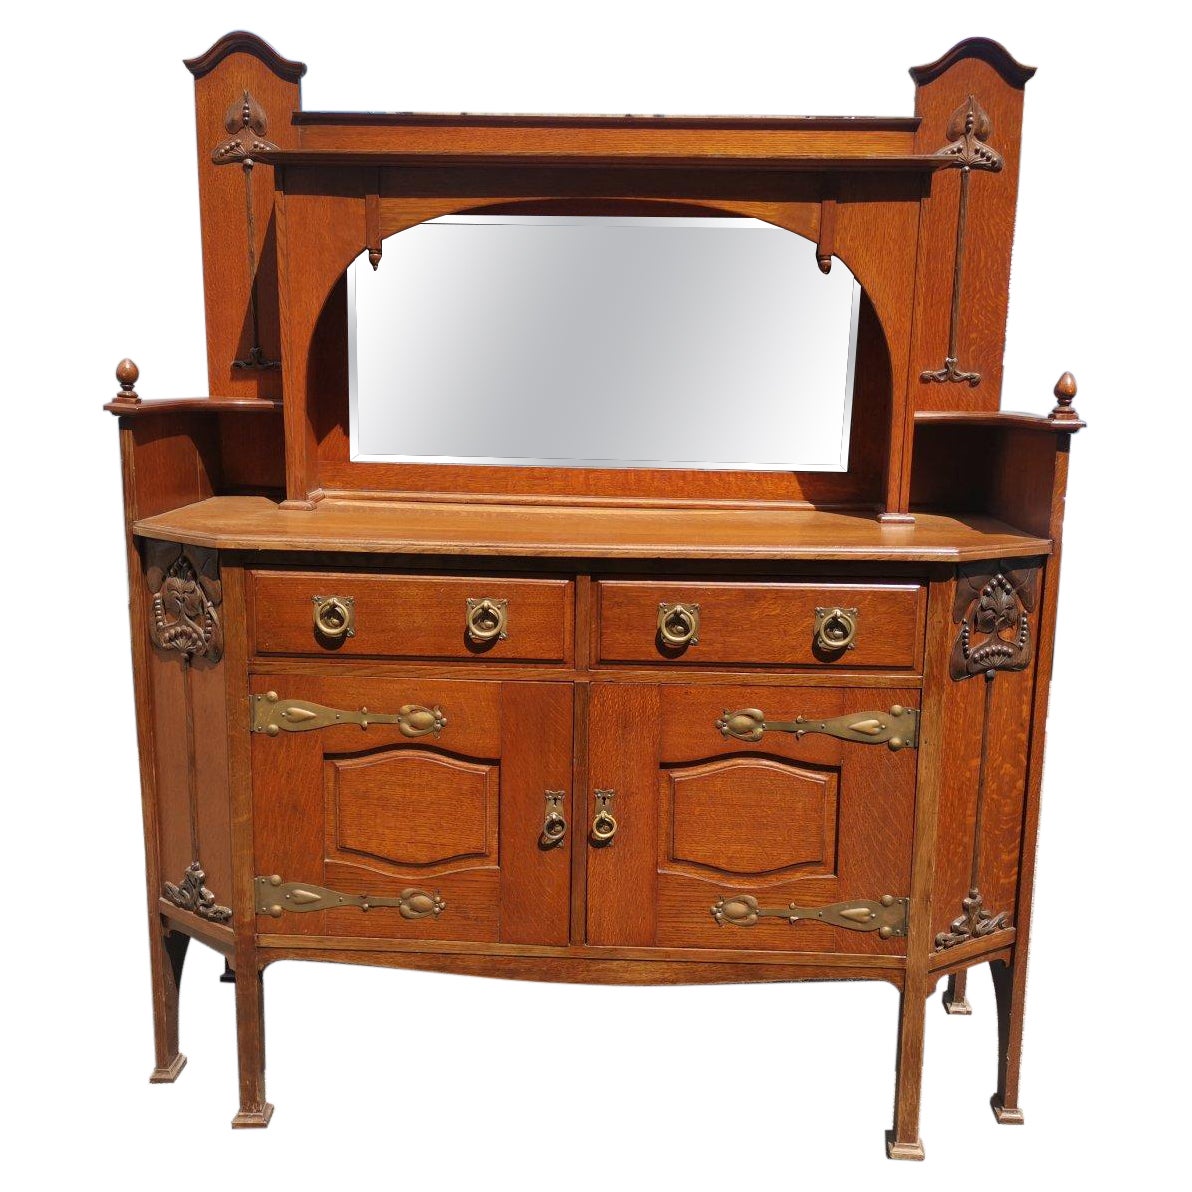 Liberty & Co Attr. An English Arts & Crafts Oak Sideboard with Carved Decoration